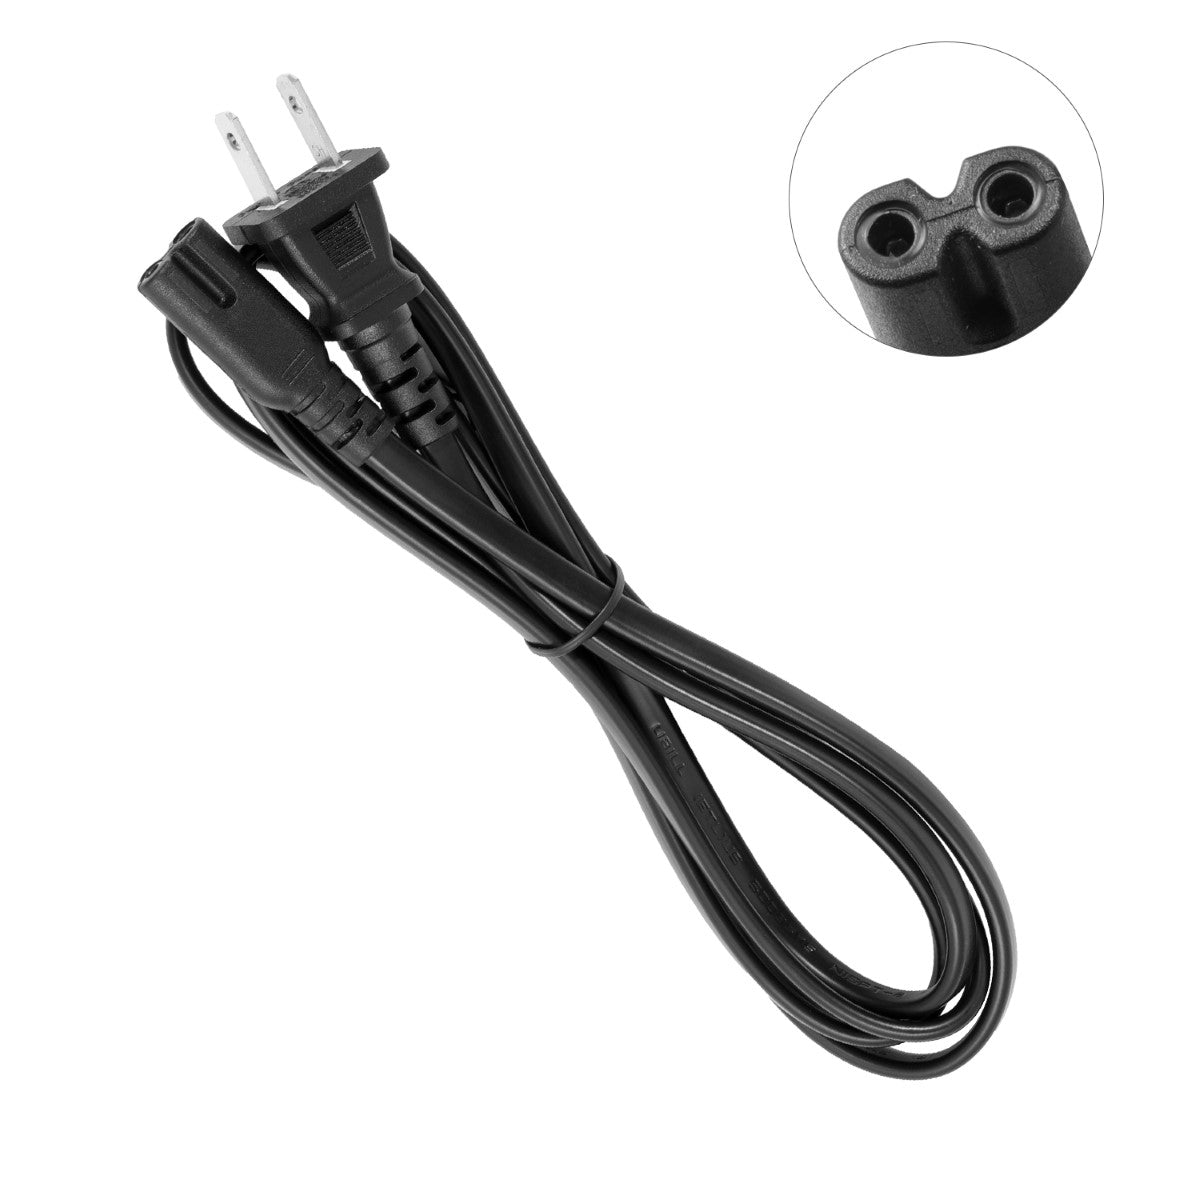 Power Cord for HP ENVY 5642 e-All-in-One Printer.